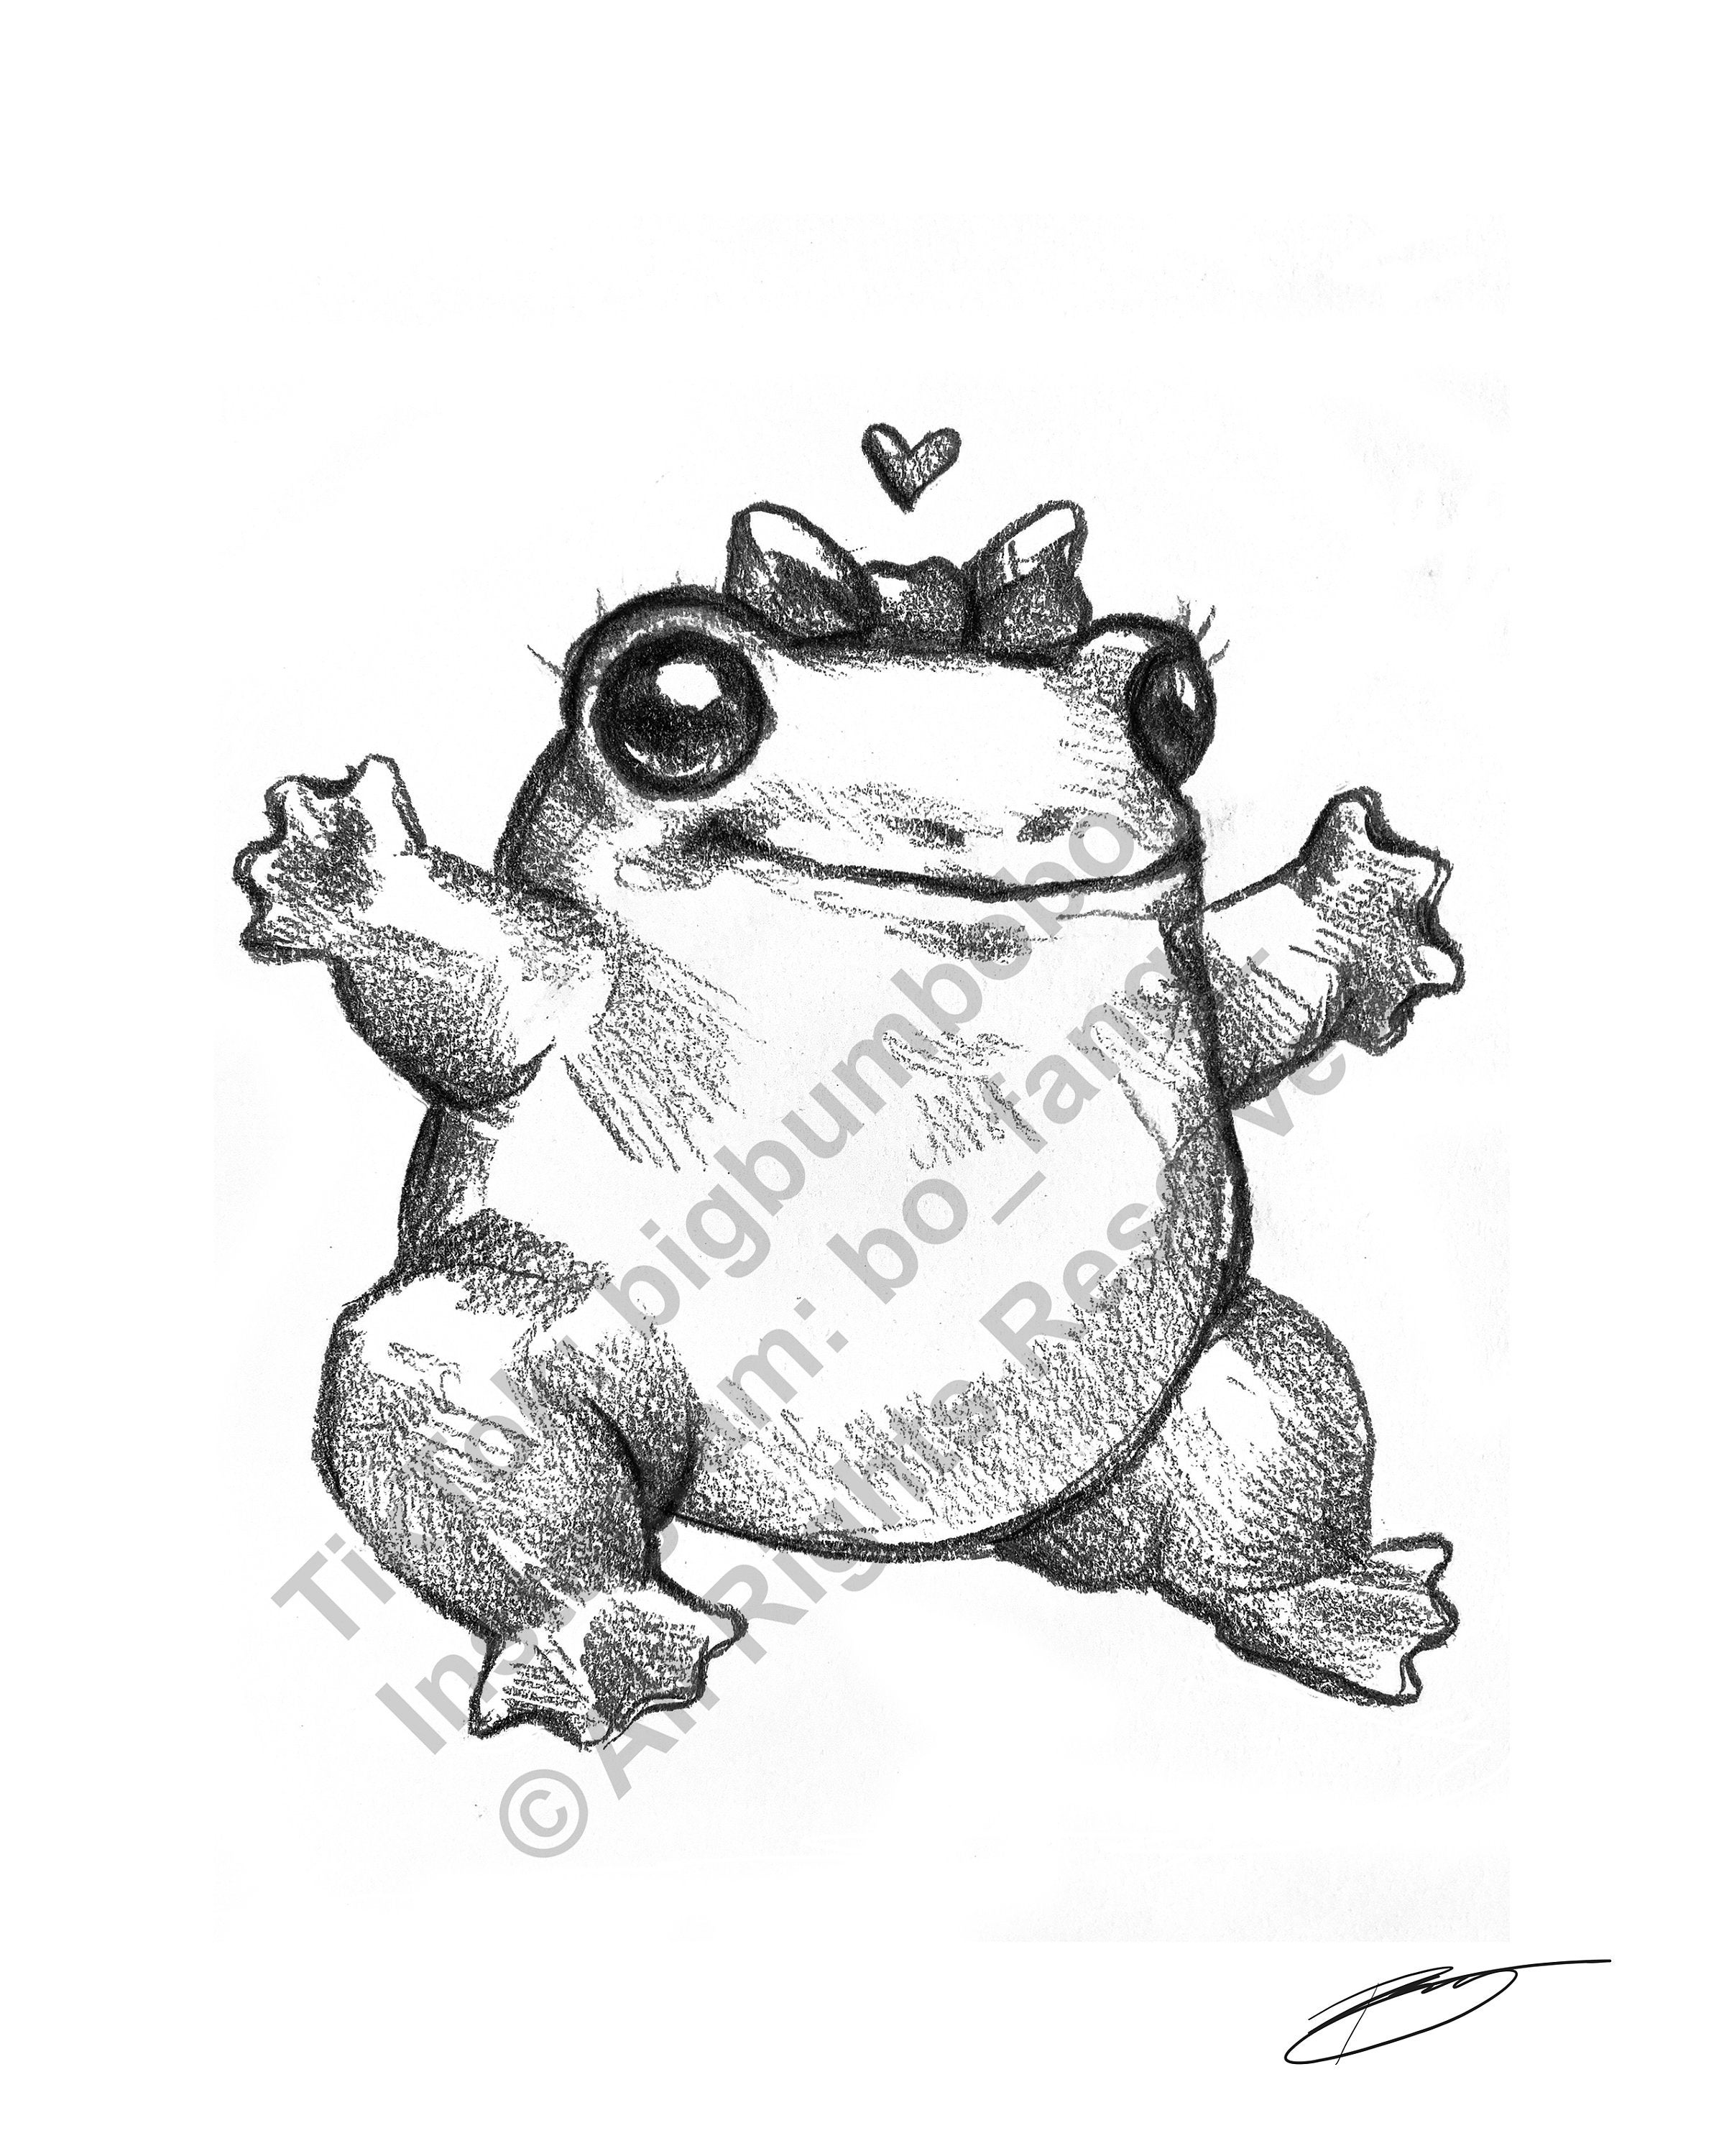 Fat Little Baby Frog Sketch Drawing Illustration 8.5 X 11 Animal